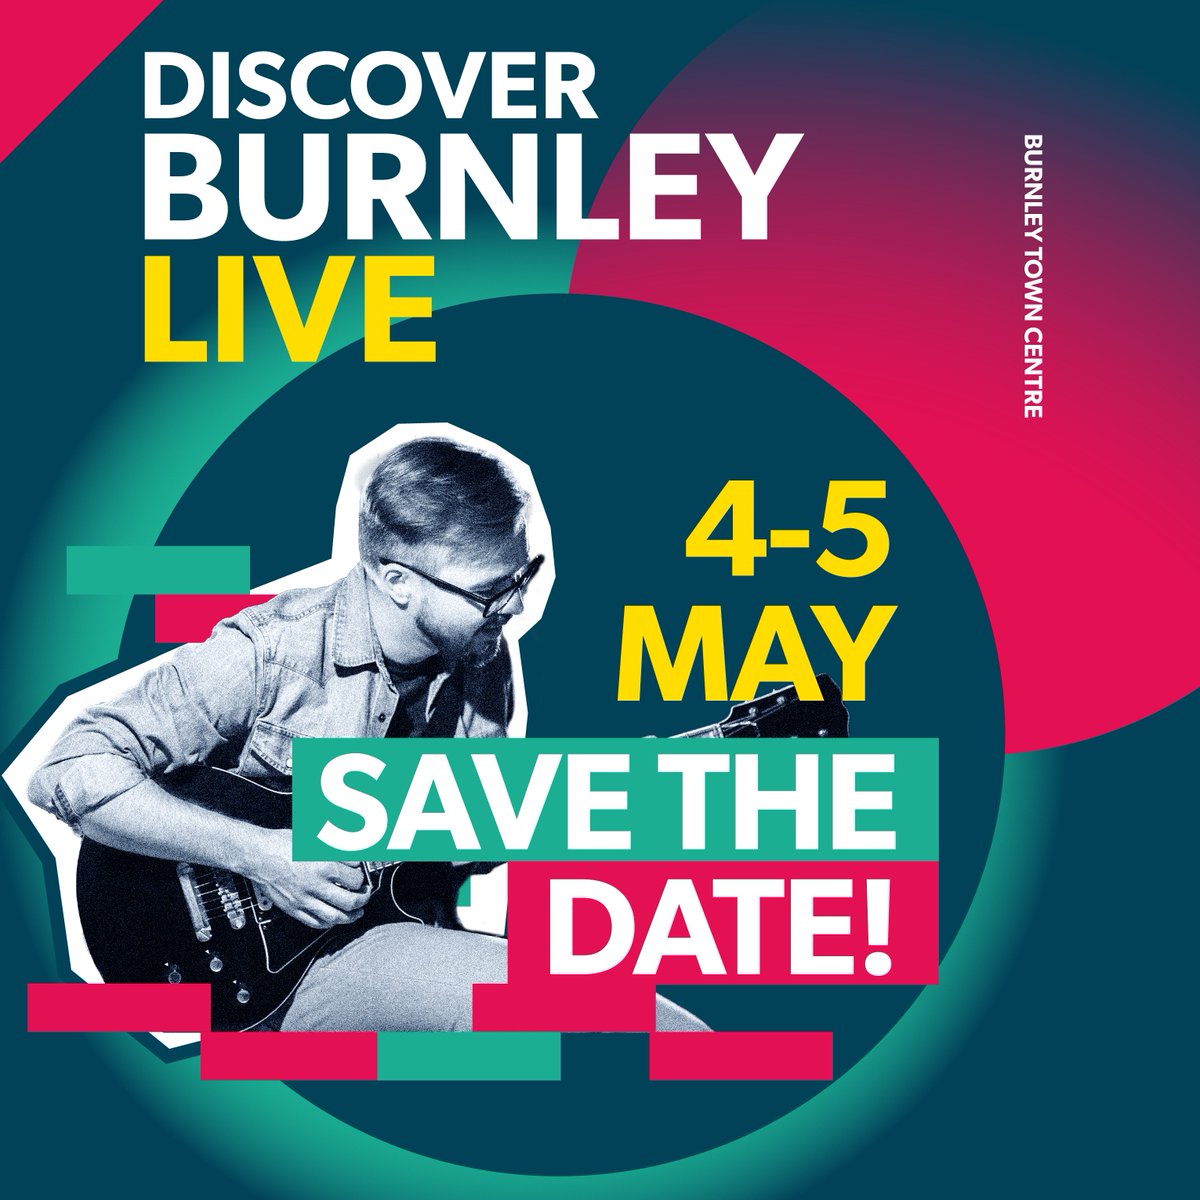 Save the date! 🗓️ Did you enjoy #Burnley Live last year? The music festival is returning to town on Saturday 4th and Sunday 5th May! 🎤🎸 Over the coming weeks and months we will be revealing more details about the event and who is taking part, so watch this space!